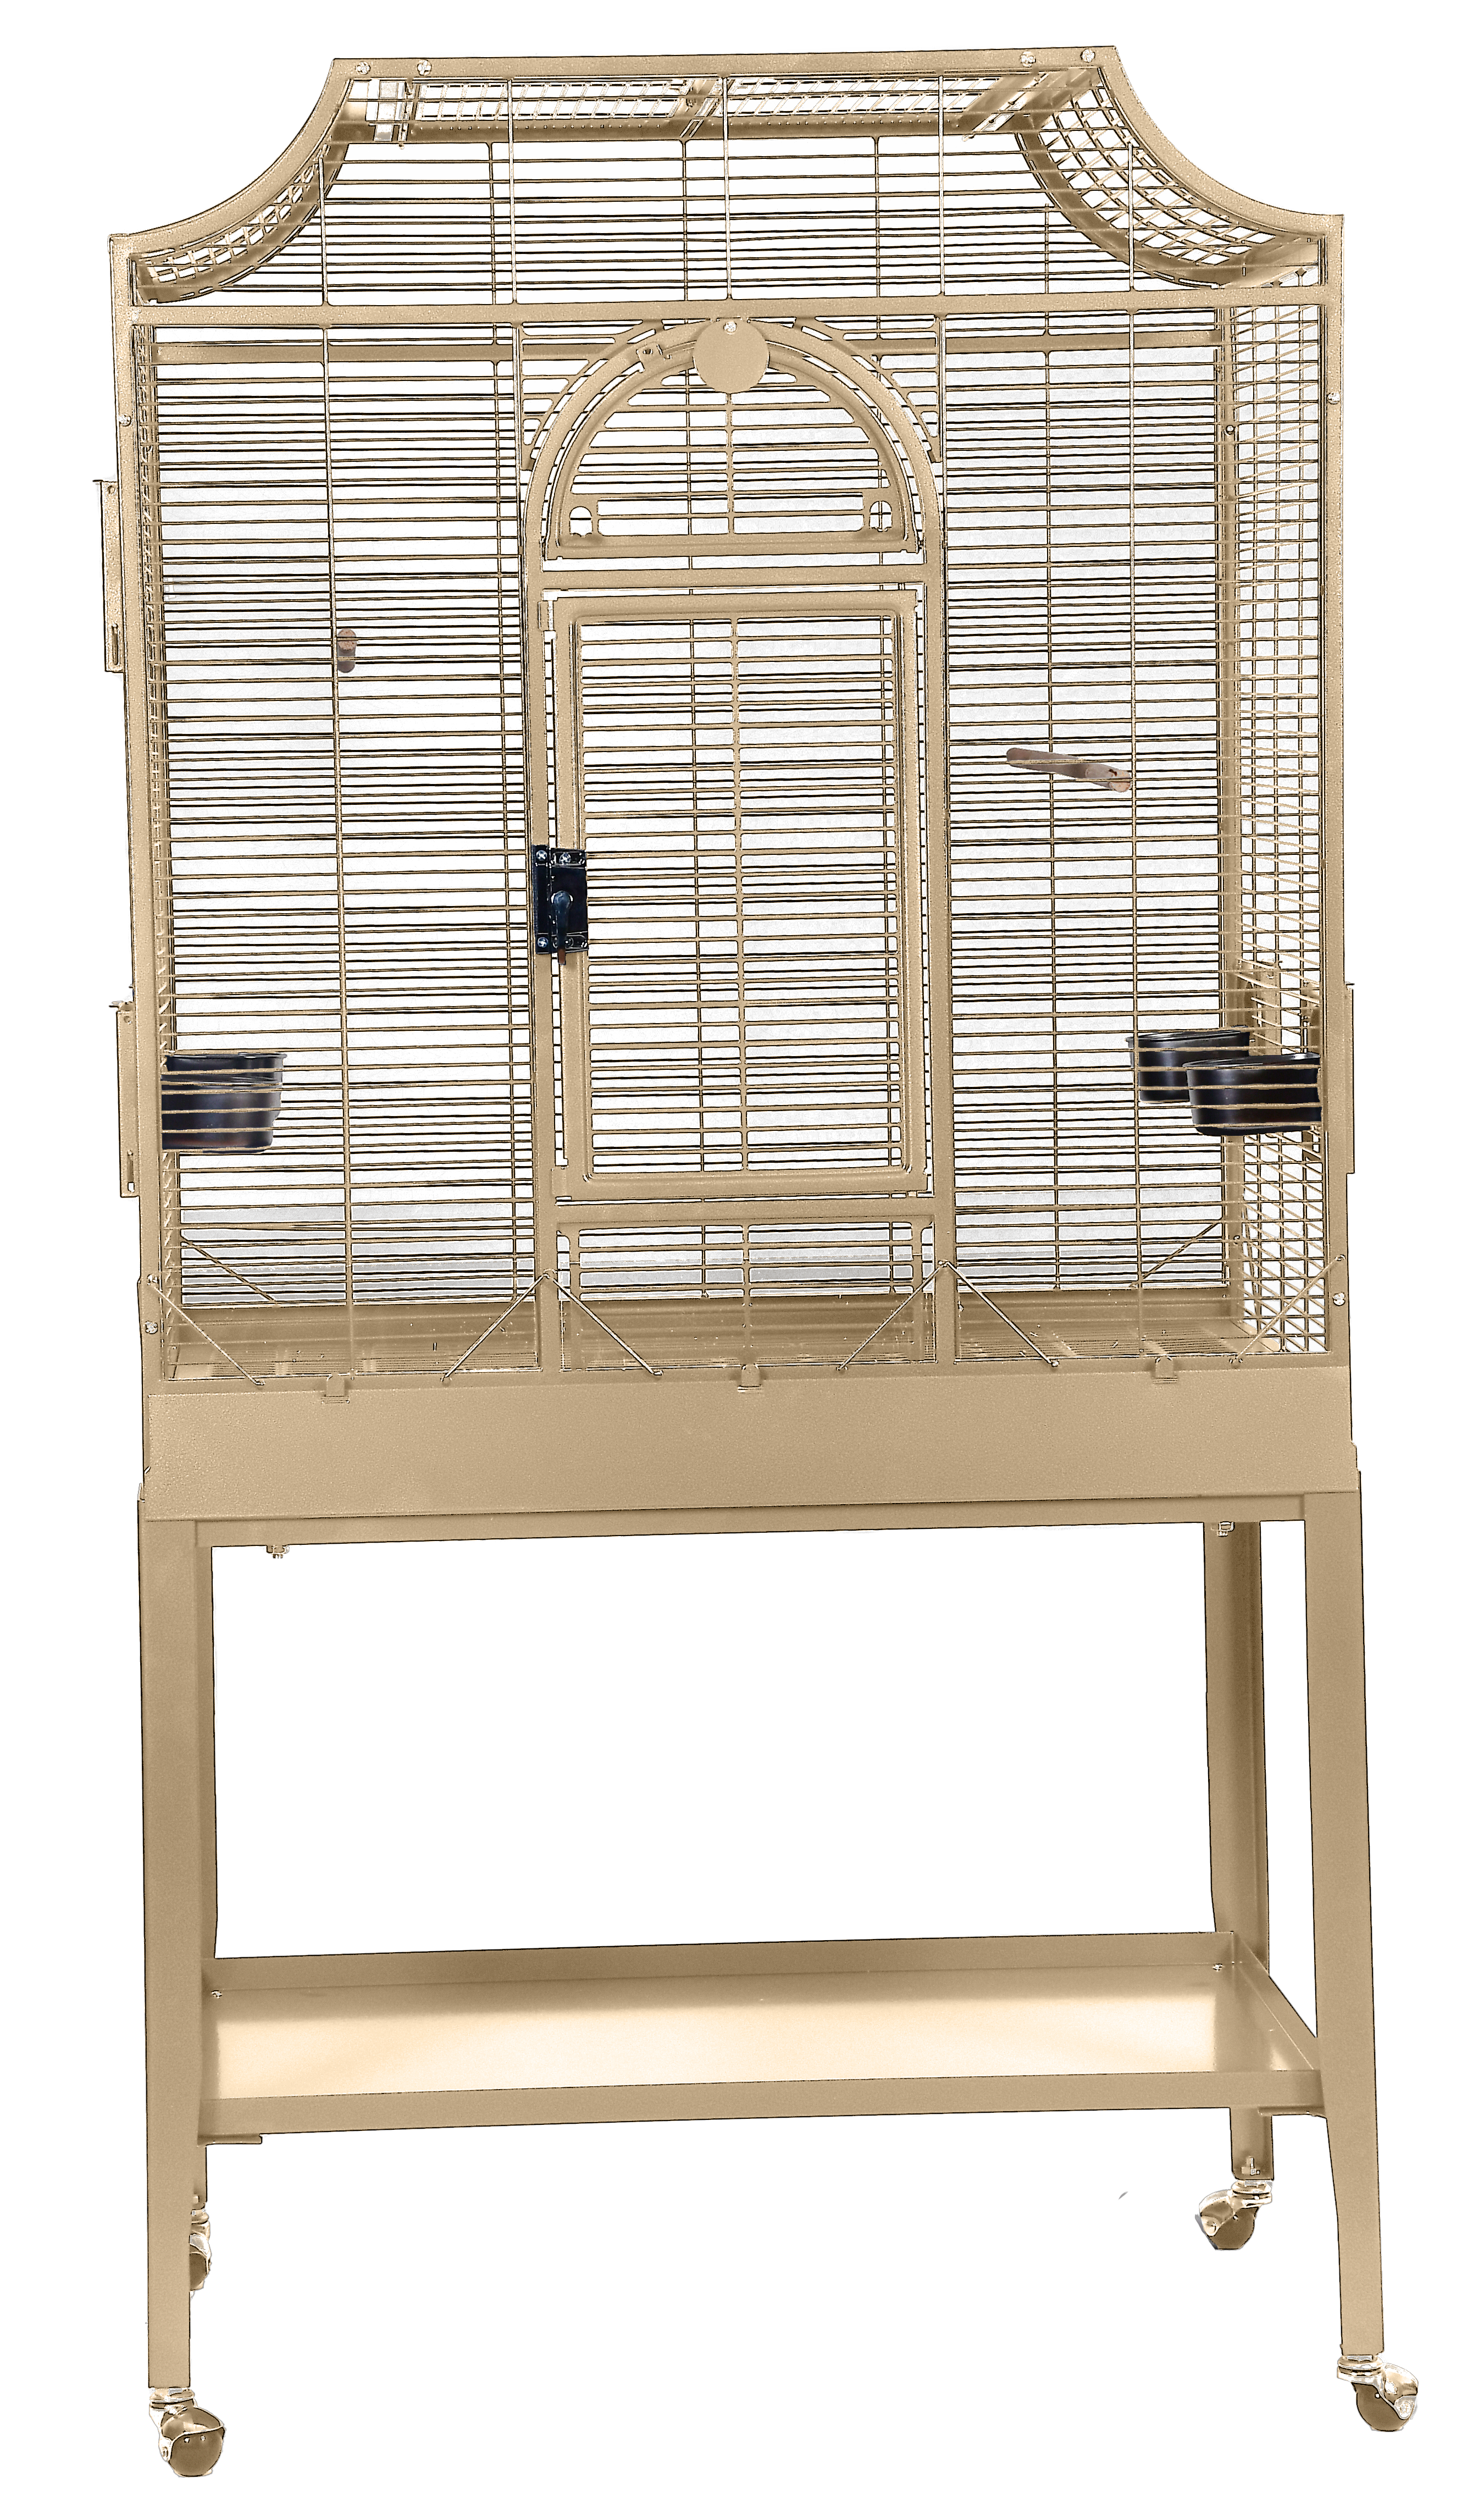 A&E Cage Co. 32"x21"x61" Elegant Flight Cage with Opening Top